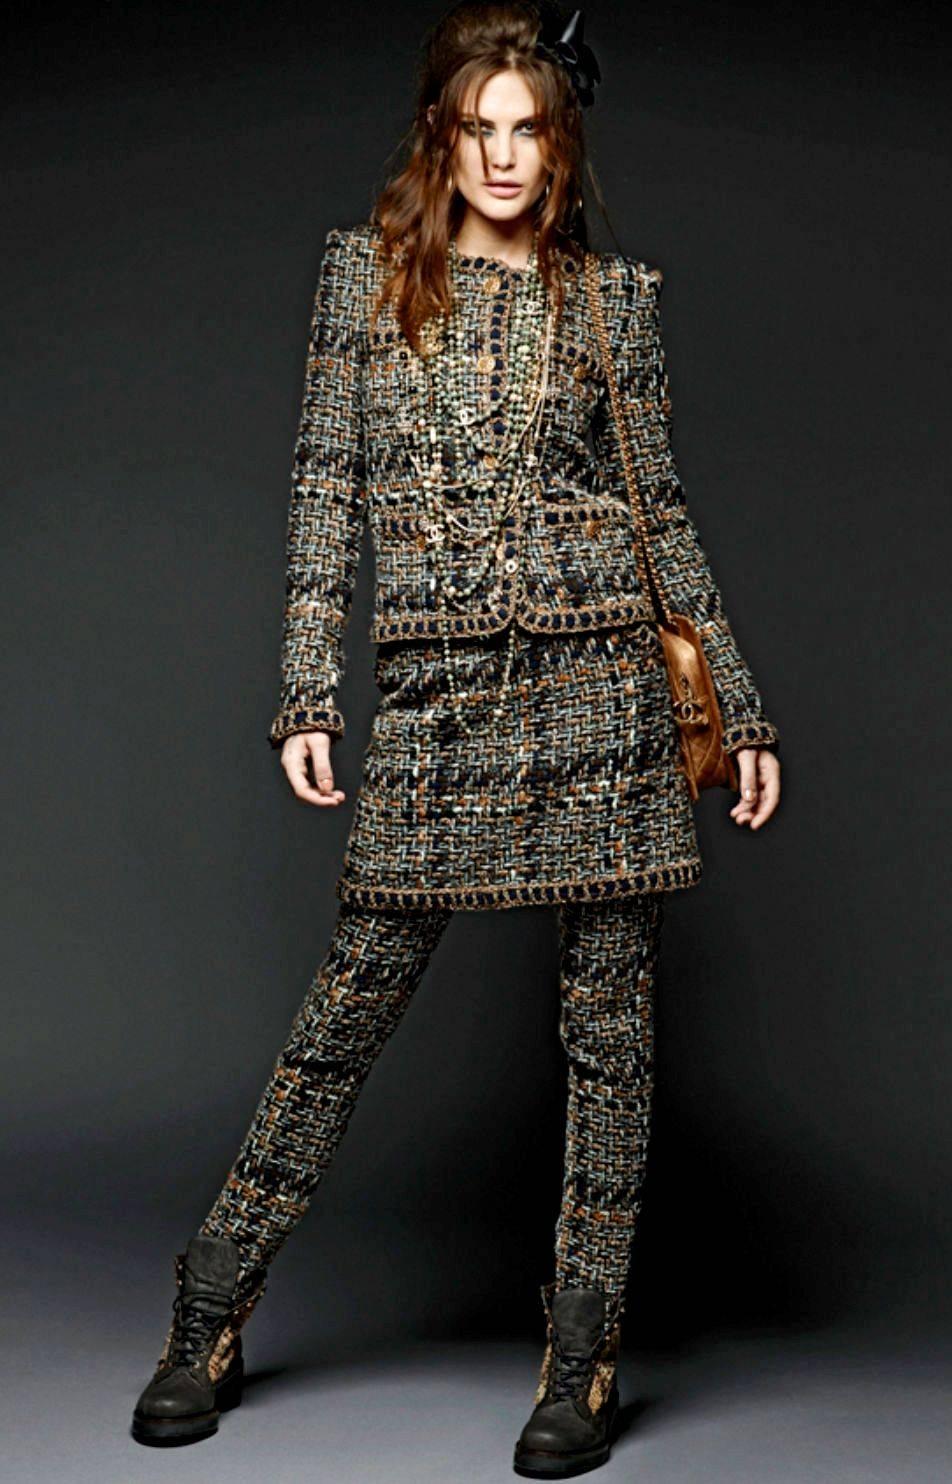 Women's NEW Chanel Metallic Fantasy Tweed Dress with Braid Details 40 For Sale